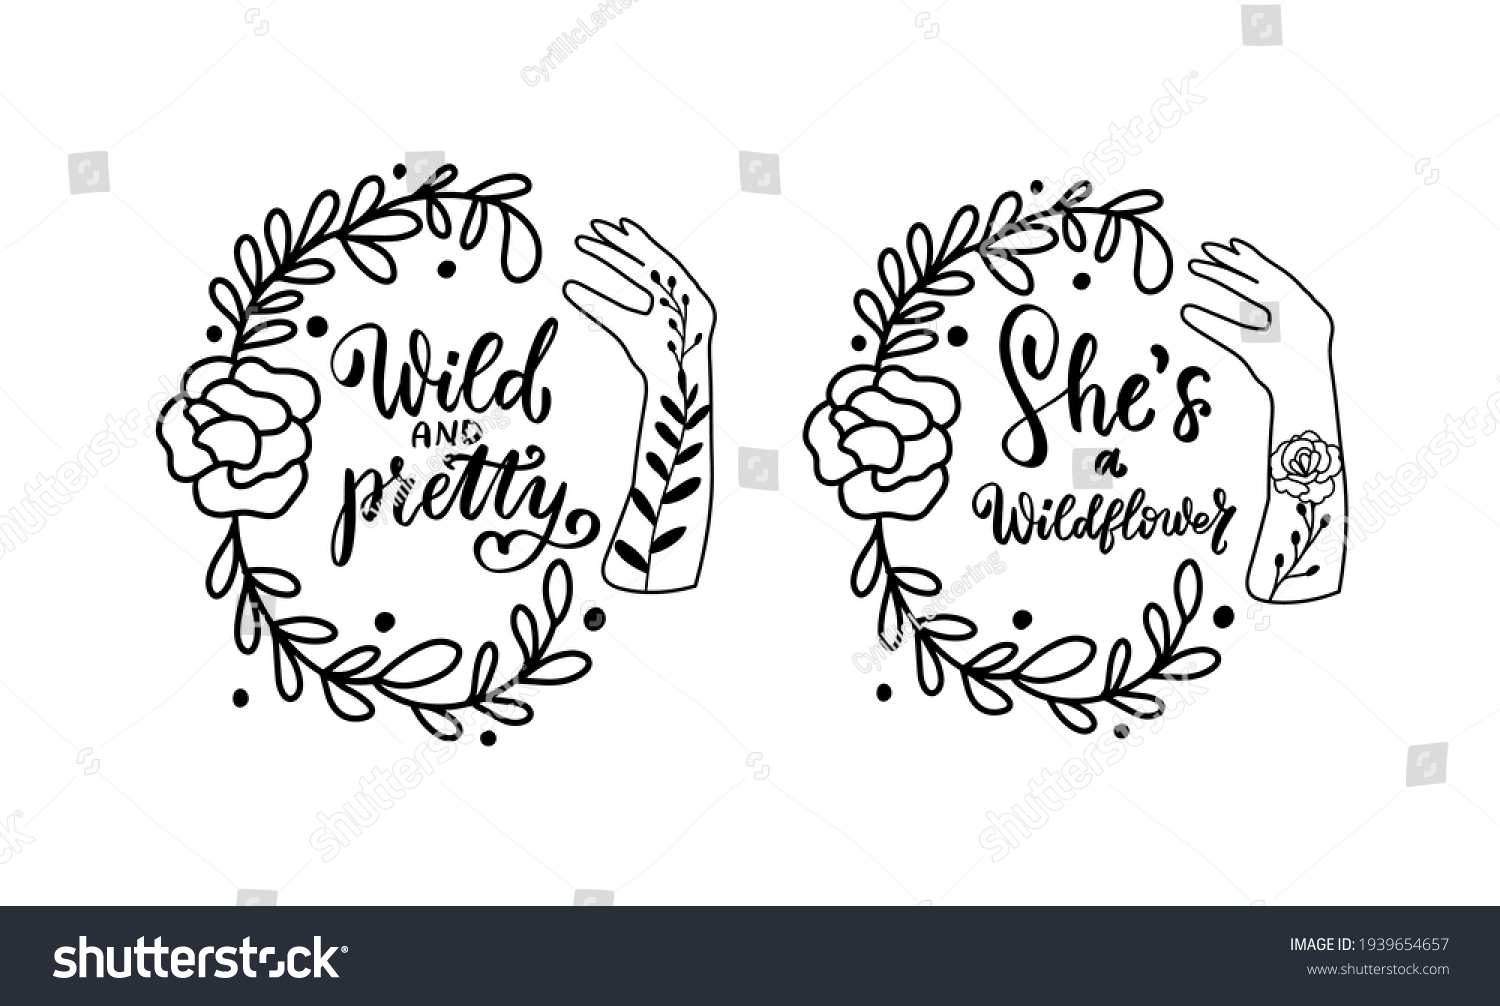 SVG of Wild and pretty quote. She is a wildflower. Mehndi woman hands withhand lettering boho celestial quote. Wild flowers wreathe. Gypsy rustic bohemian vector illustration for shirt design. Boho clipart. svg